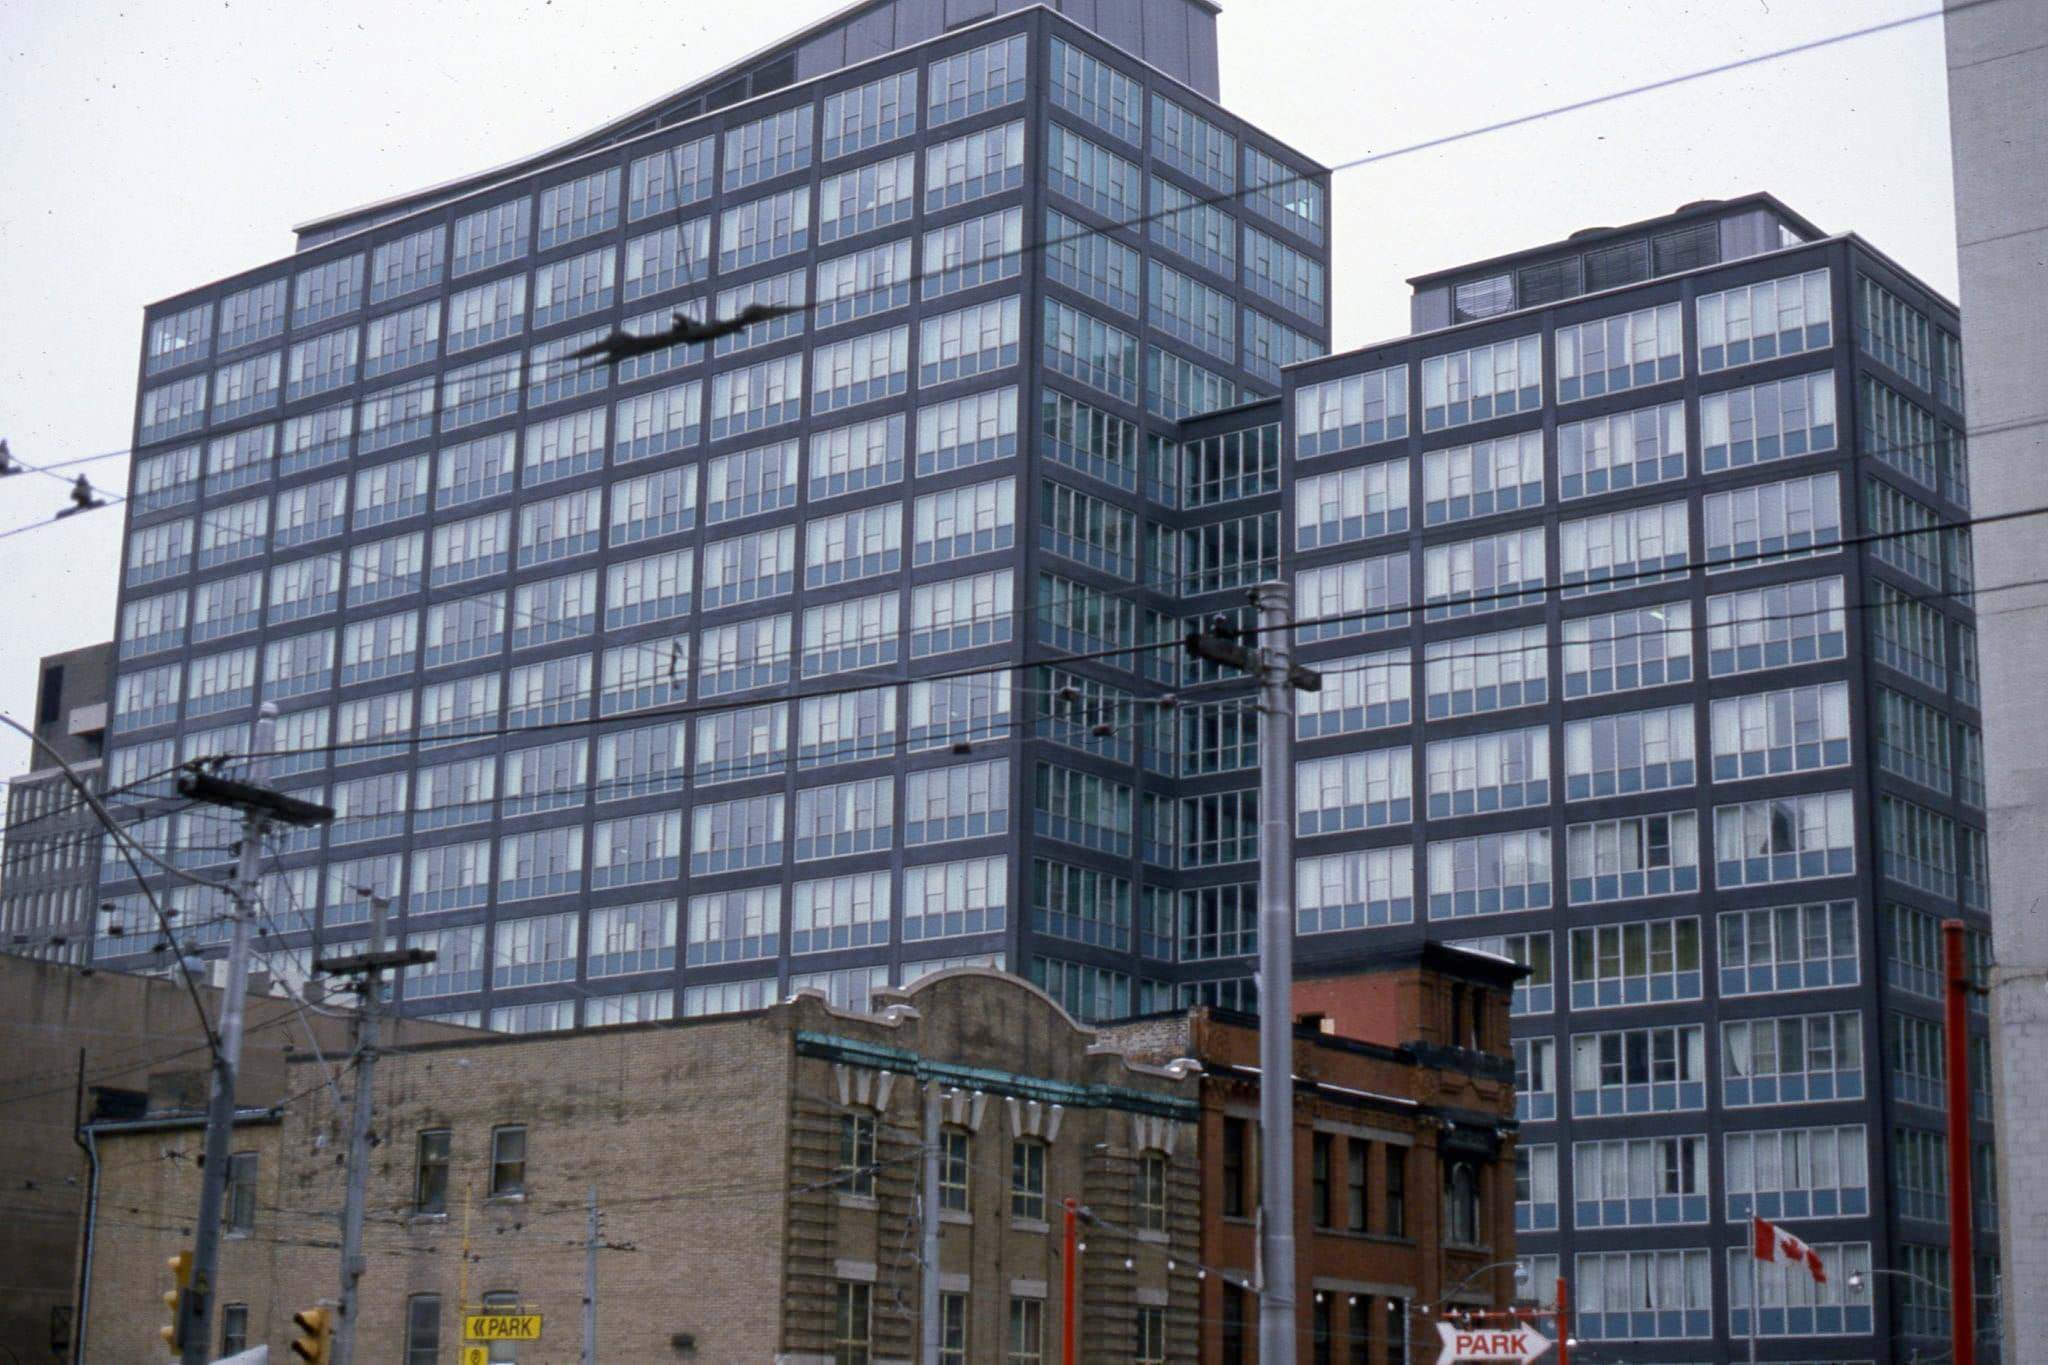 View looking south east from Victoria St., to Lombard Ave. The grey building in the background is 30 Adelaide St. E., 1982